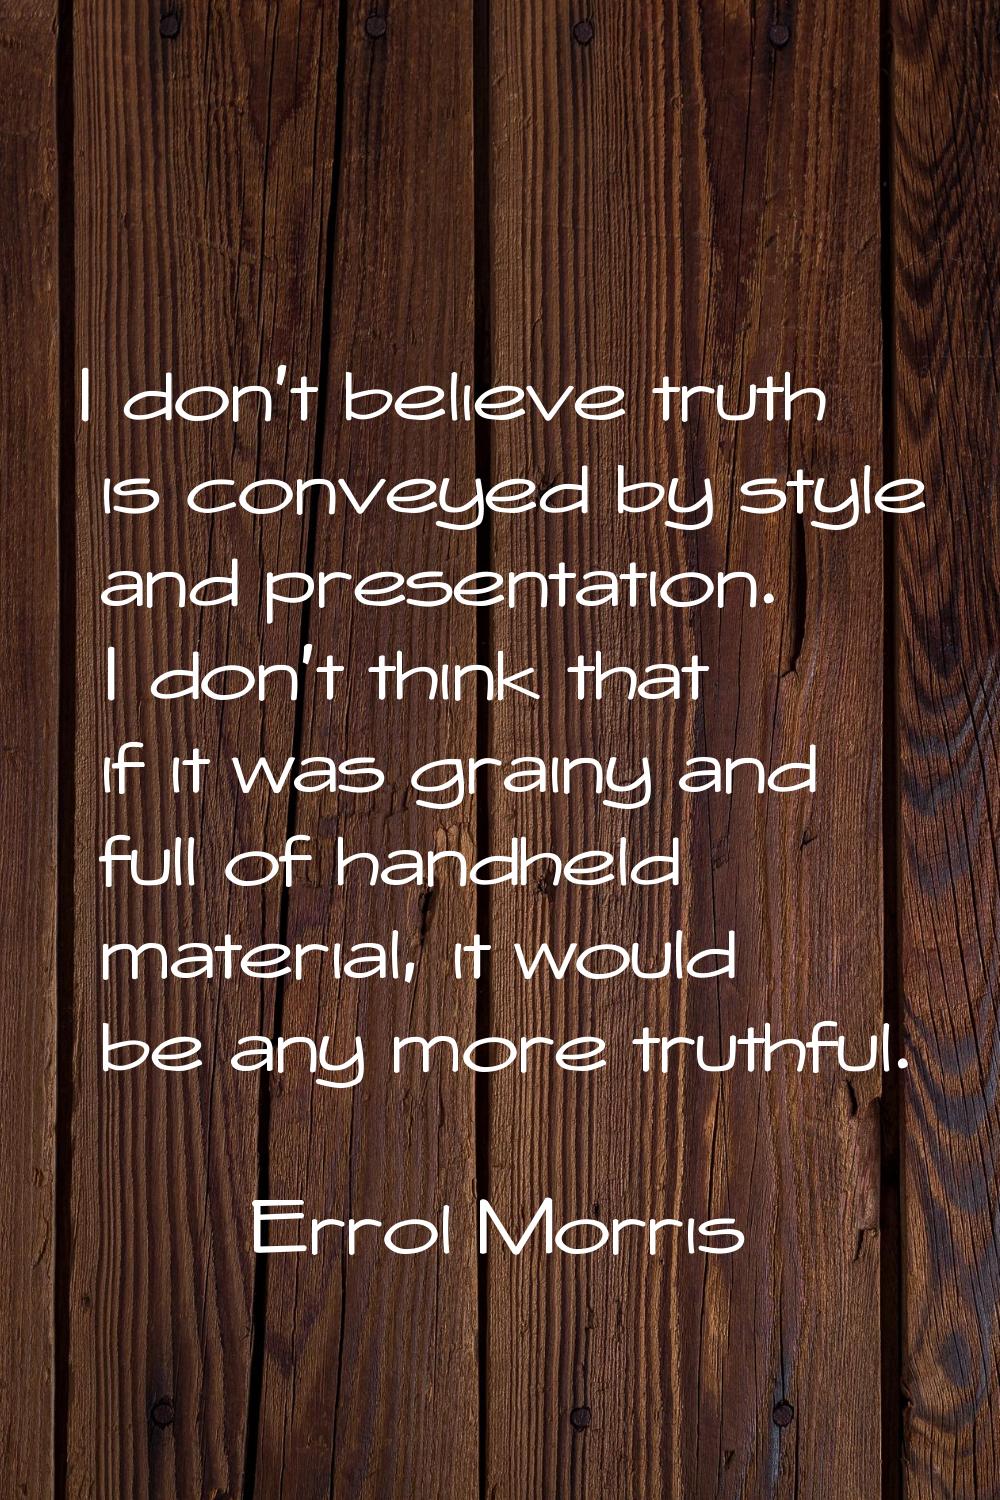 I don't believe truth is conveyed by style and presentation. I don't think that if it was grainy an